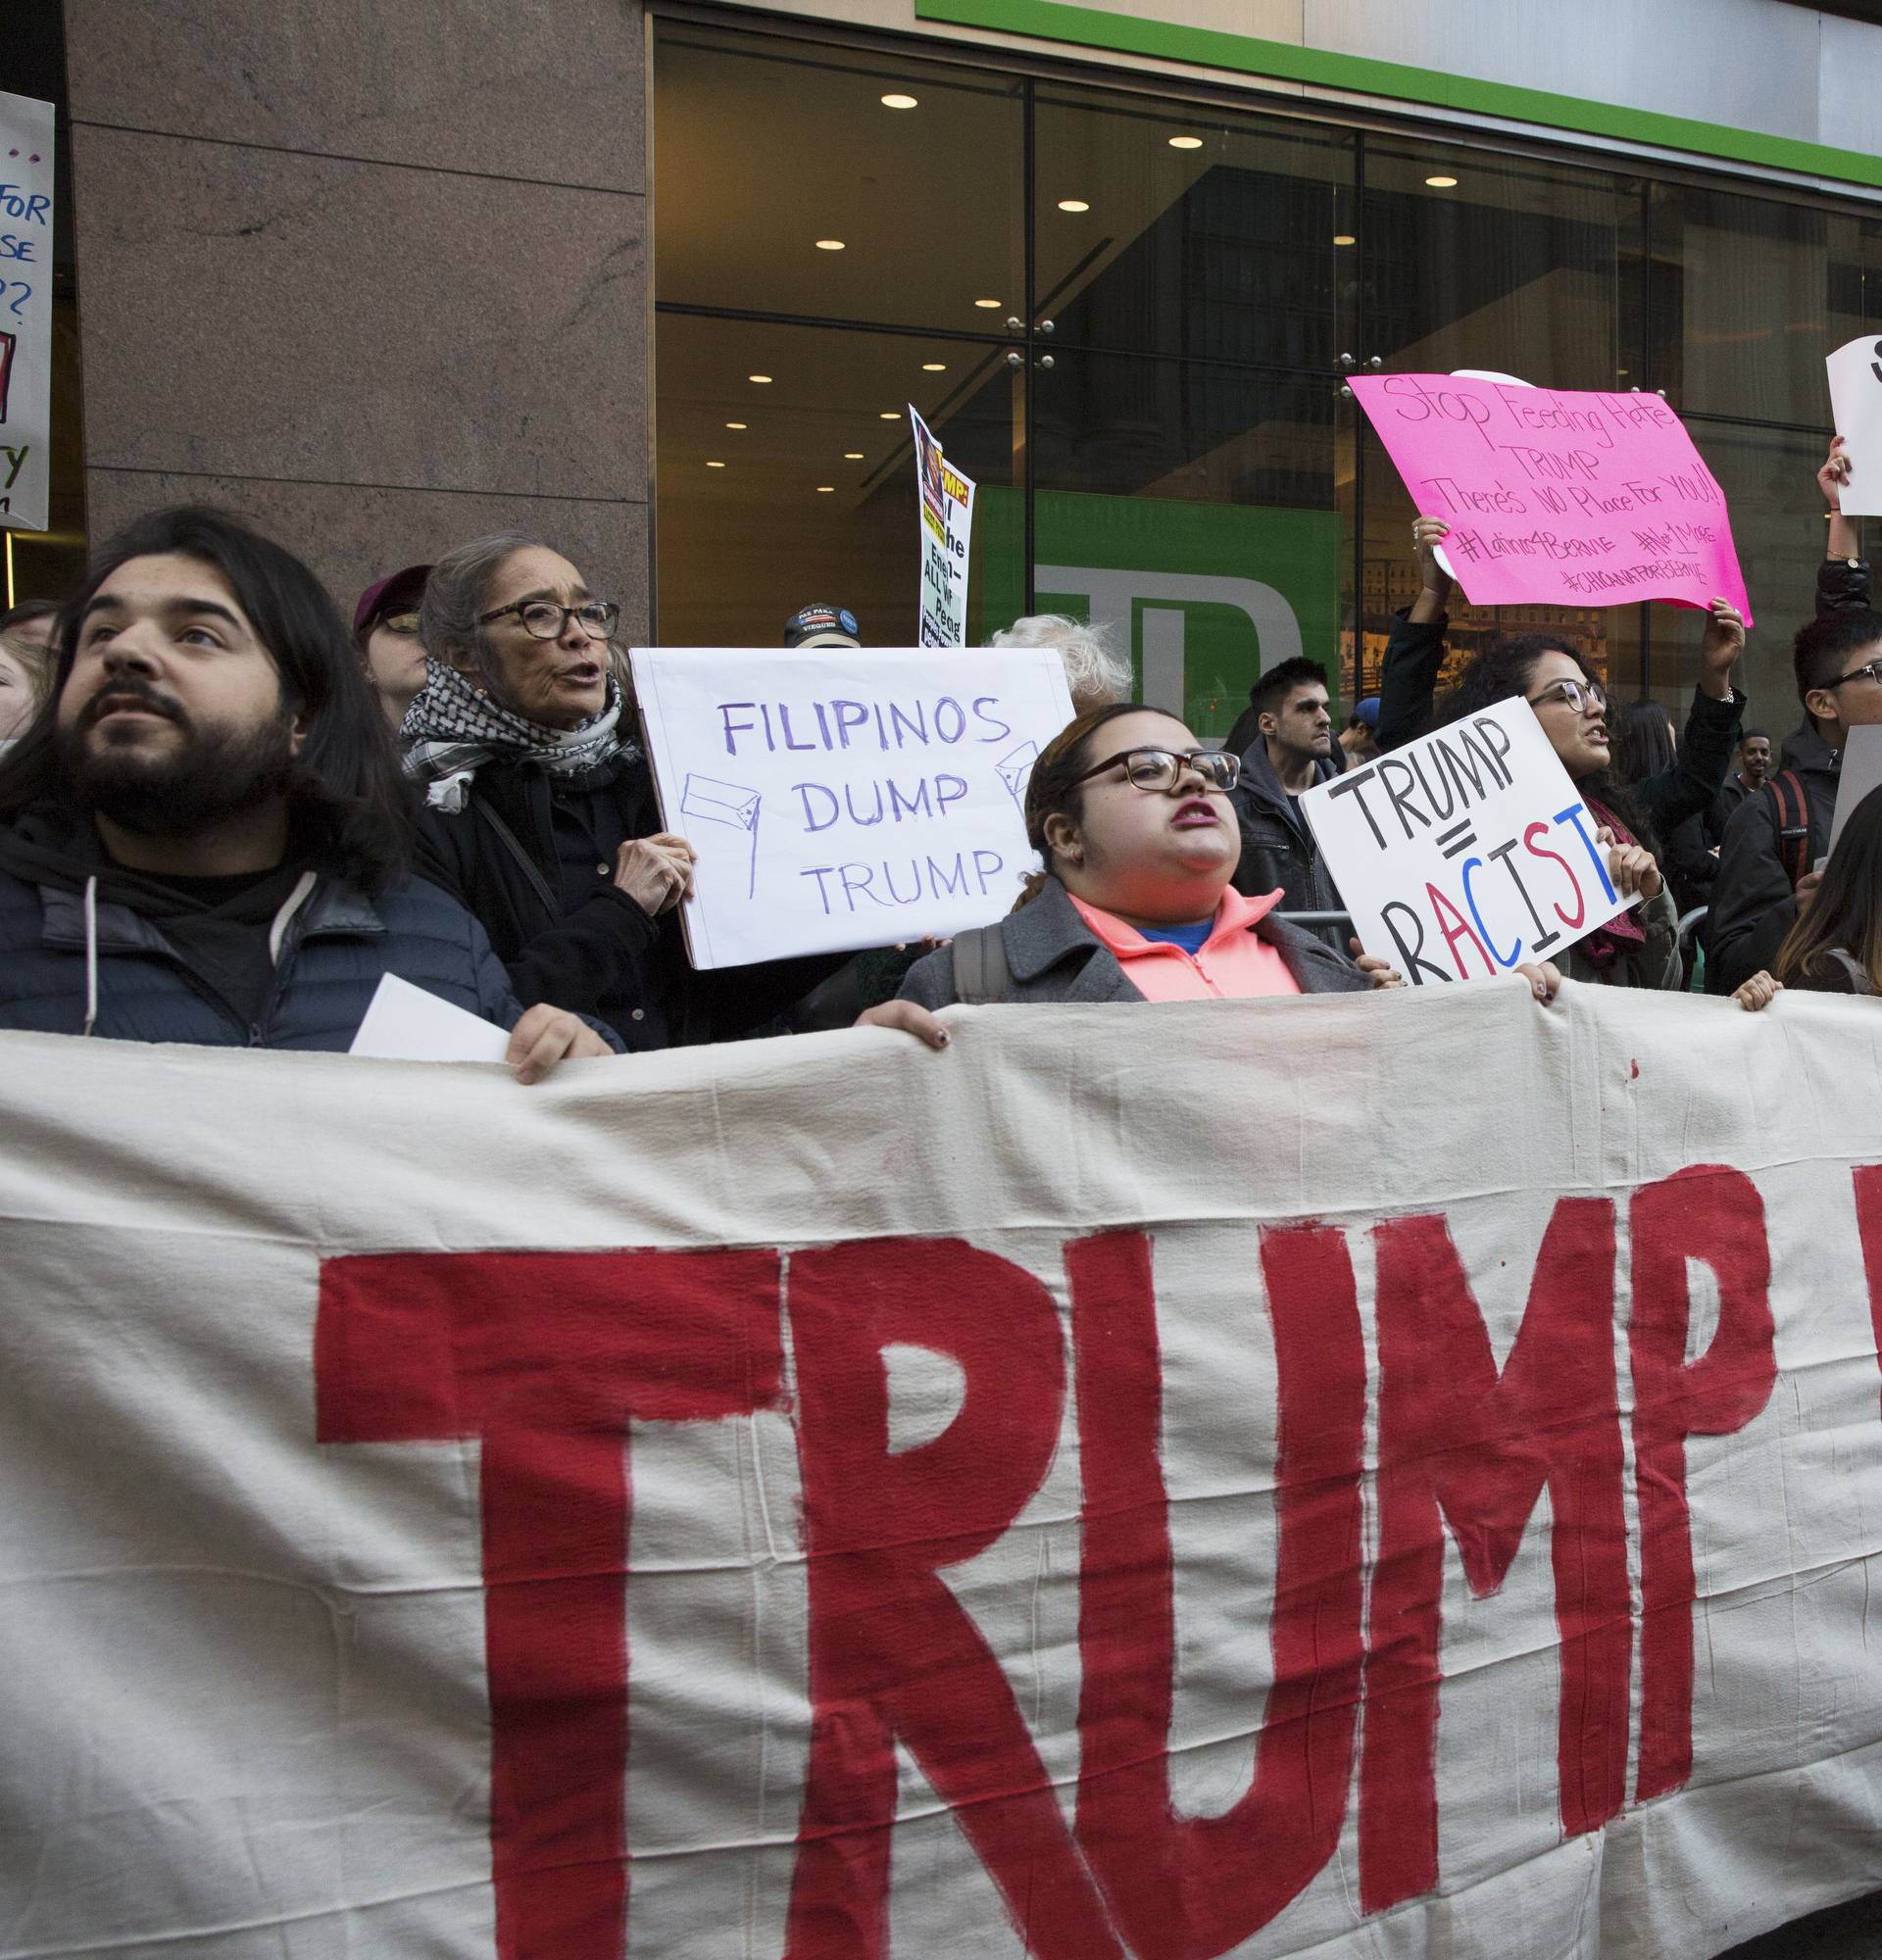 Protesters demonstrate against Republican U.S. presidential candidate Donald Trump in midtown Manhattan in New York City